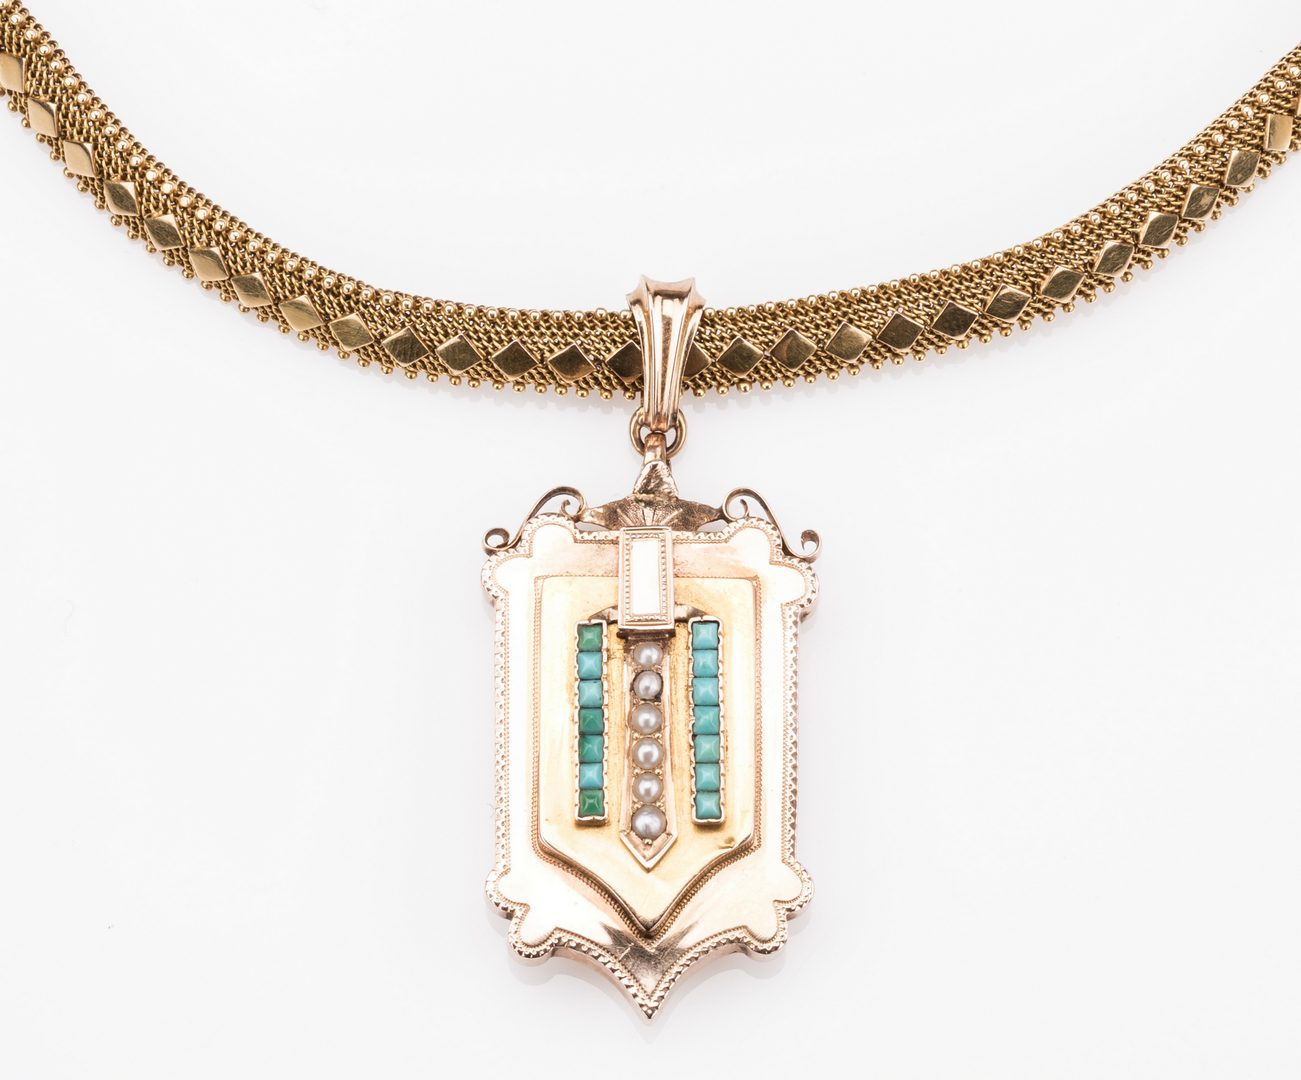 Lot 250: French 18k Victorian Gold Necklace, Locket